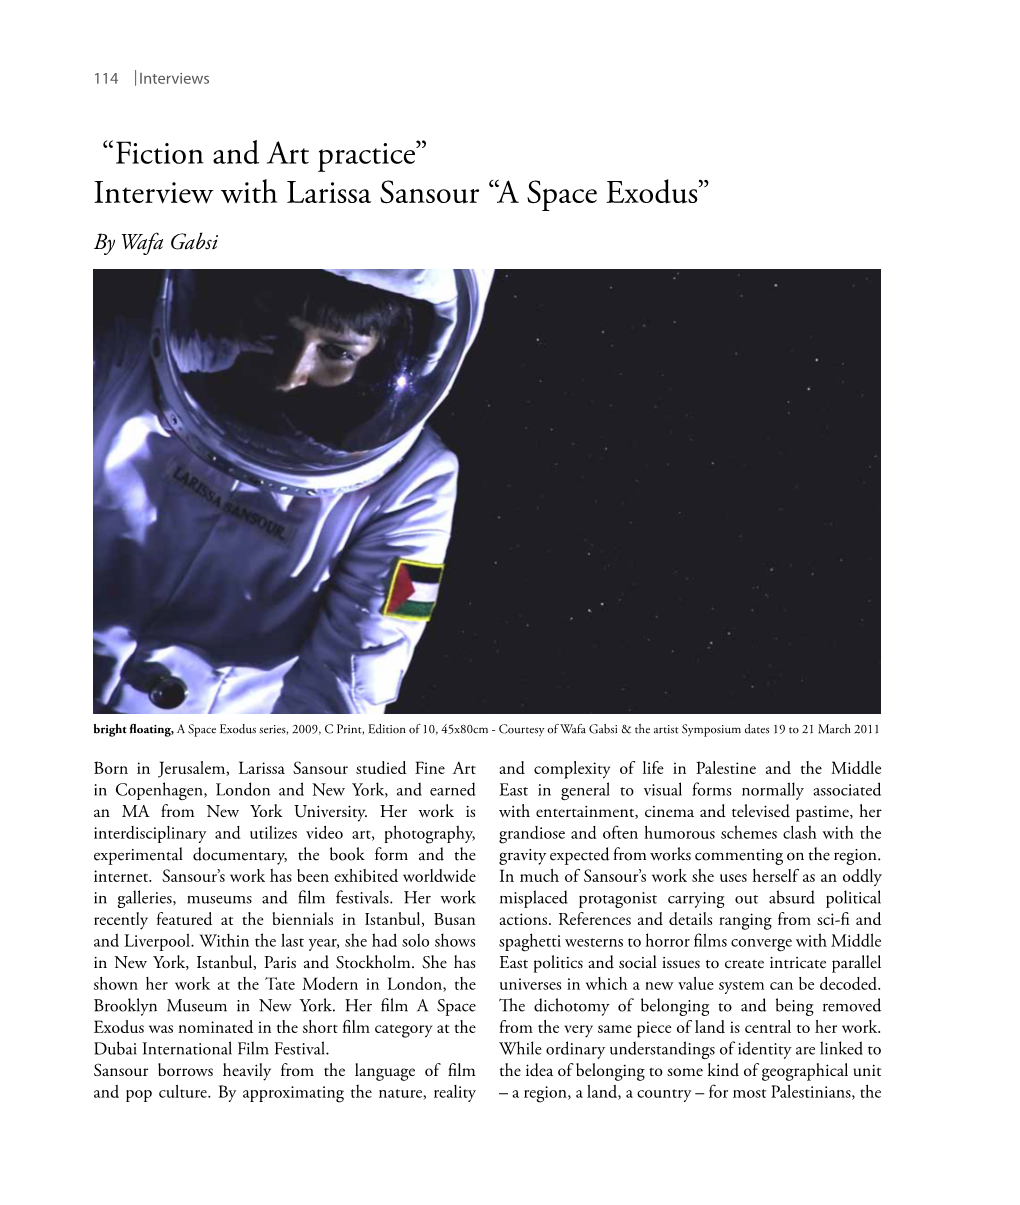 “Fiction and Art Practice” Interview with Larissa Sansour “A Space Exodus” by Wafa Gabsi